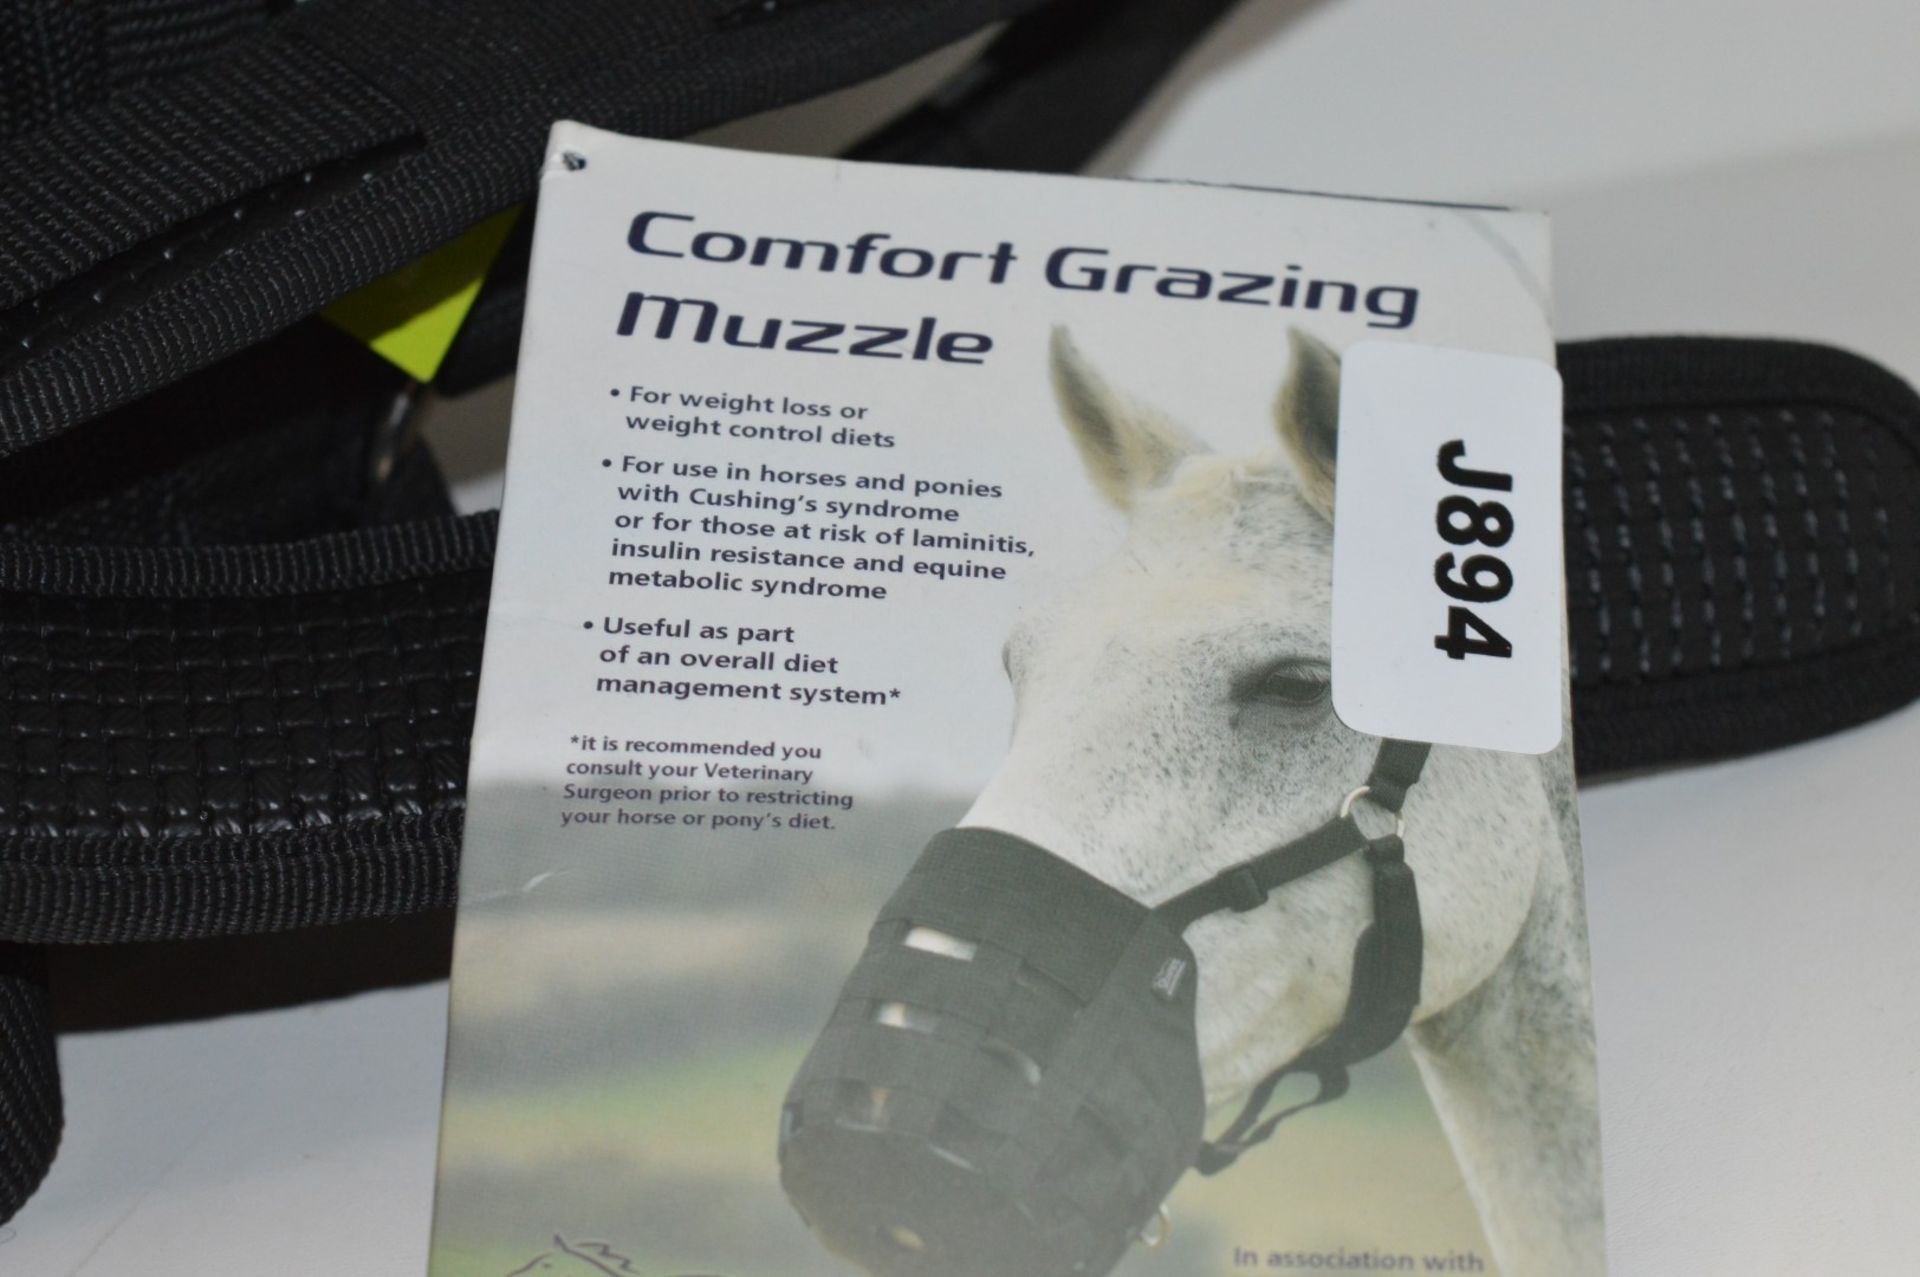 1 x Shires Comfort Grazing Muzzle - Full Size 495N Black - New Stock - CL401 - Ref J894 - - Image 4 of 4